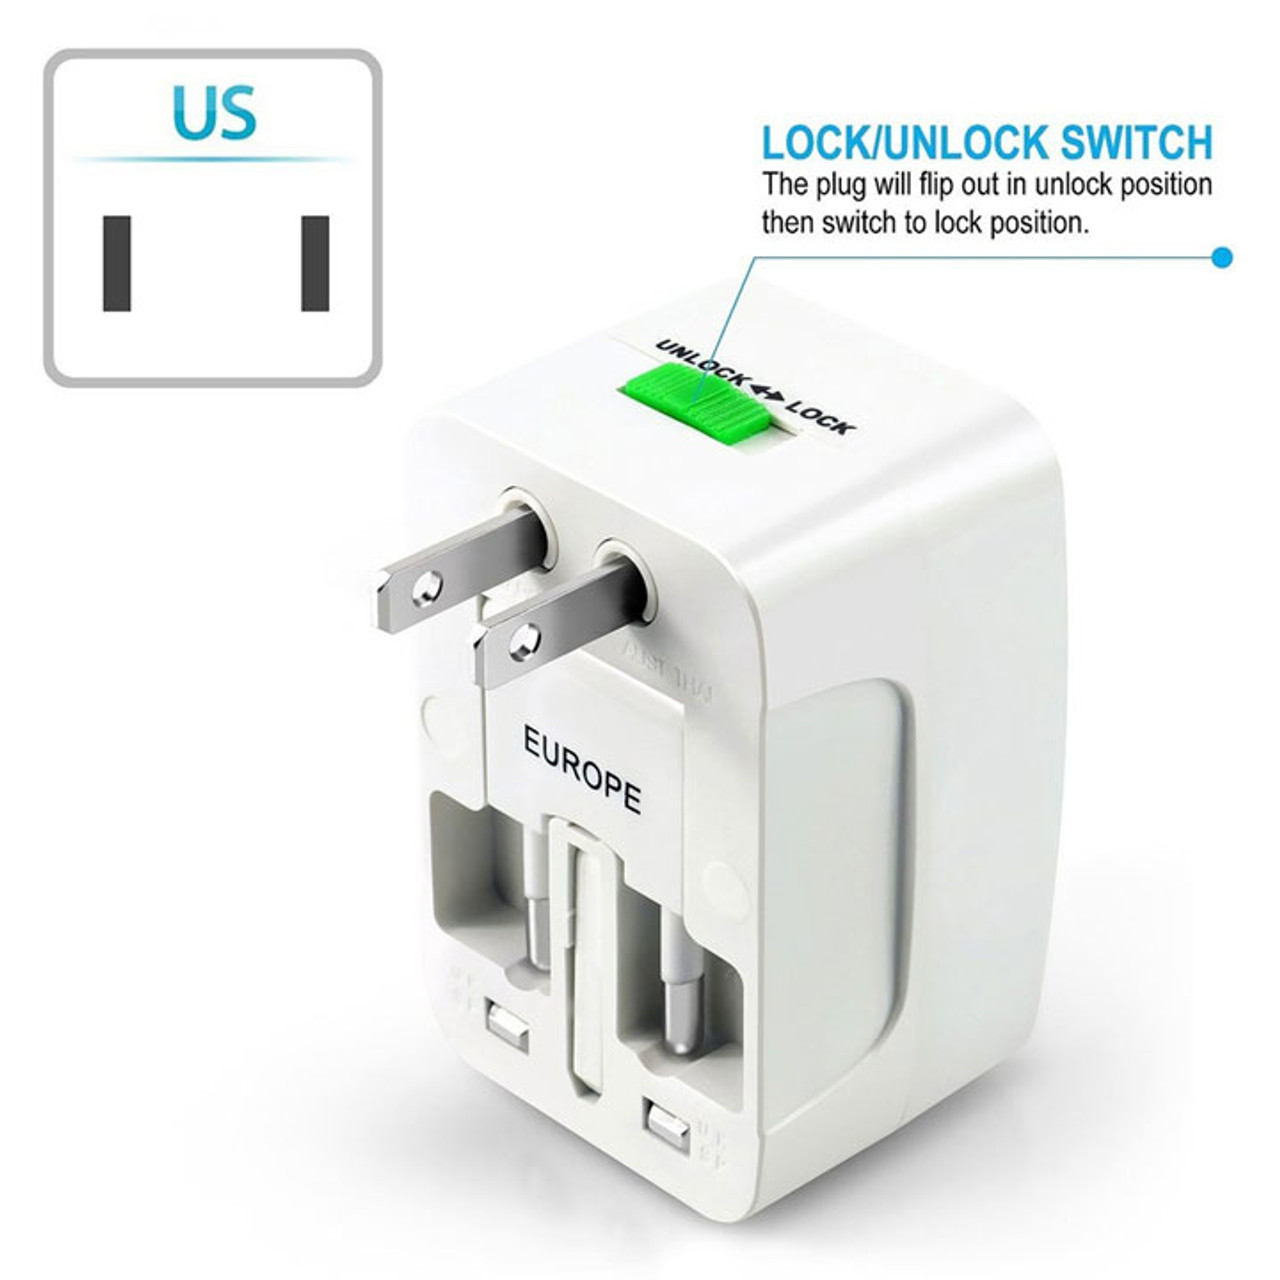 https://cdn11.bigcommerce.com/s-idr2t/images/stencil/1280x1280/products/185/1095/Travel-Plug-Adapter-US__33207.1526564035.jpg?c=2?imbypass=on